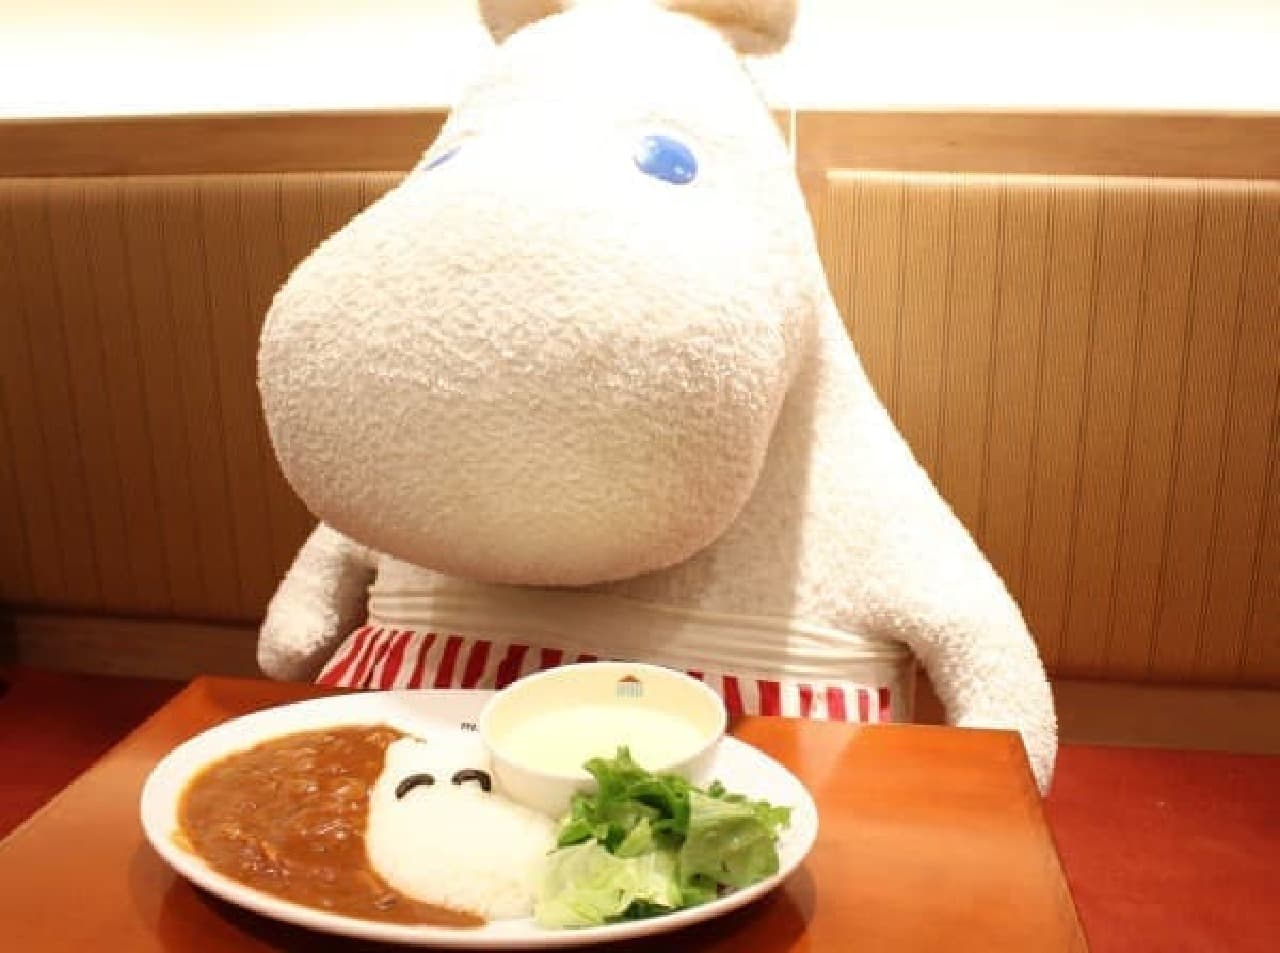 4th place "Moomin House Cafe"